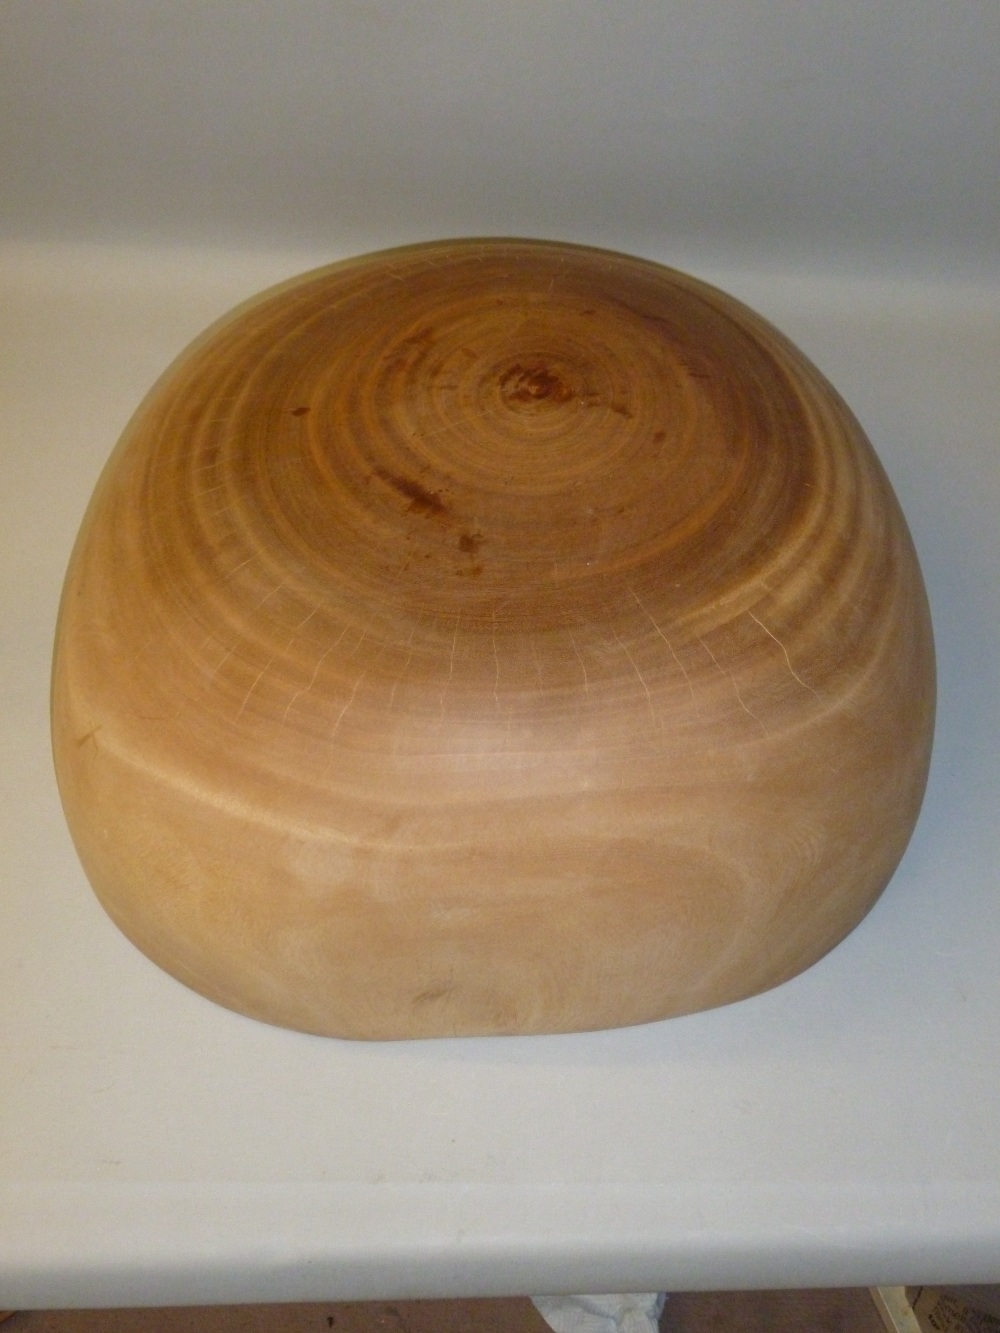 AUSTRALIAN CRAFTED HUON ? HARDWOOD TURNED AND SHAPED CIRCULAR BOWL (H: 19.5 cm, W: 48.5 cm OVERALL) - Bild 7 aus 9